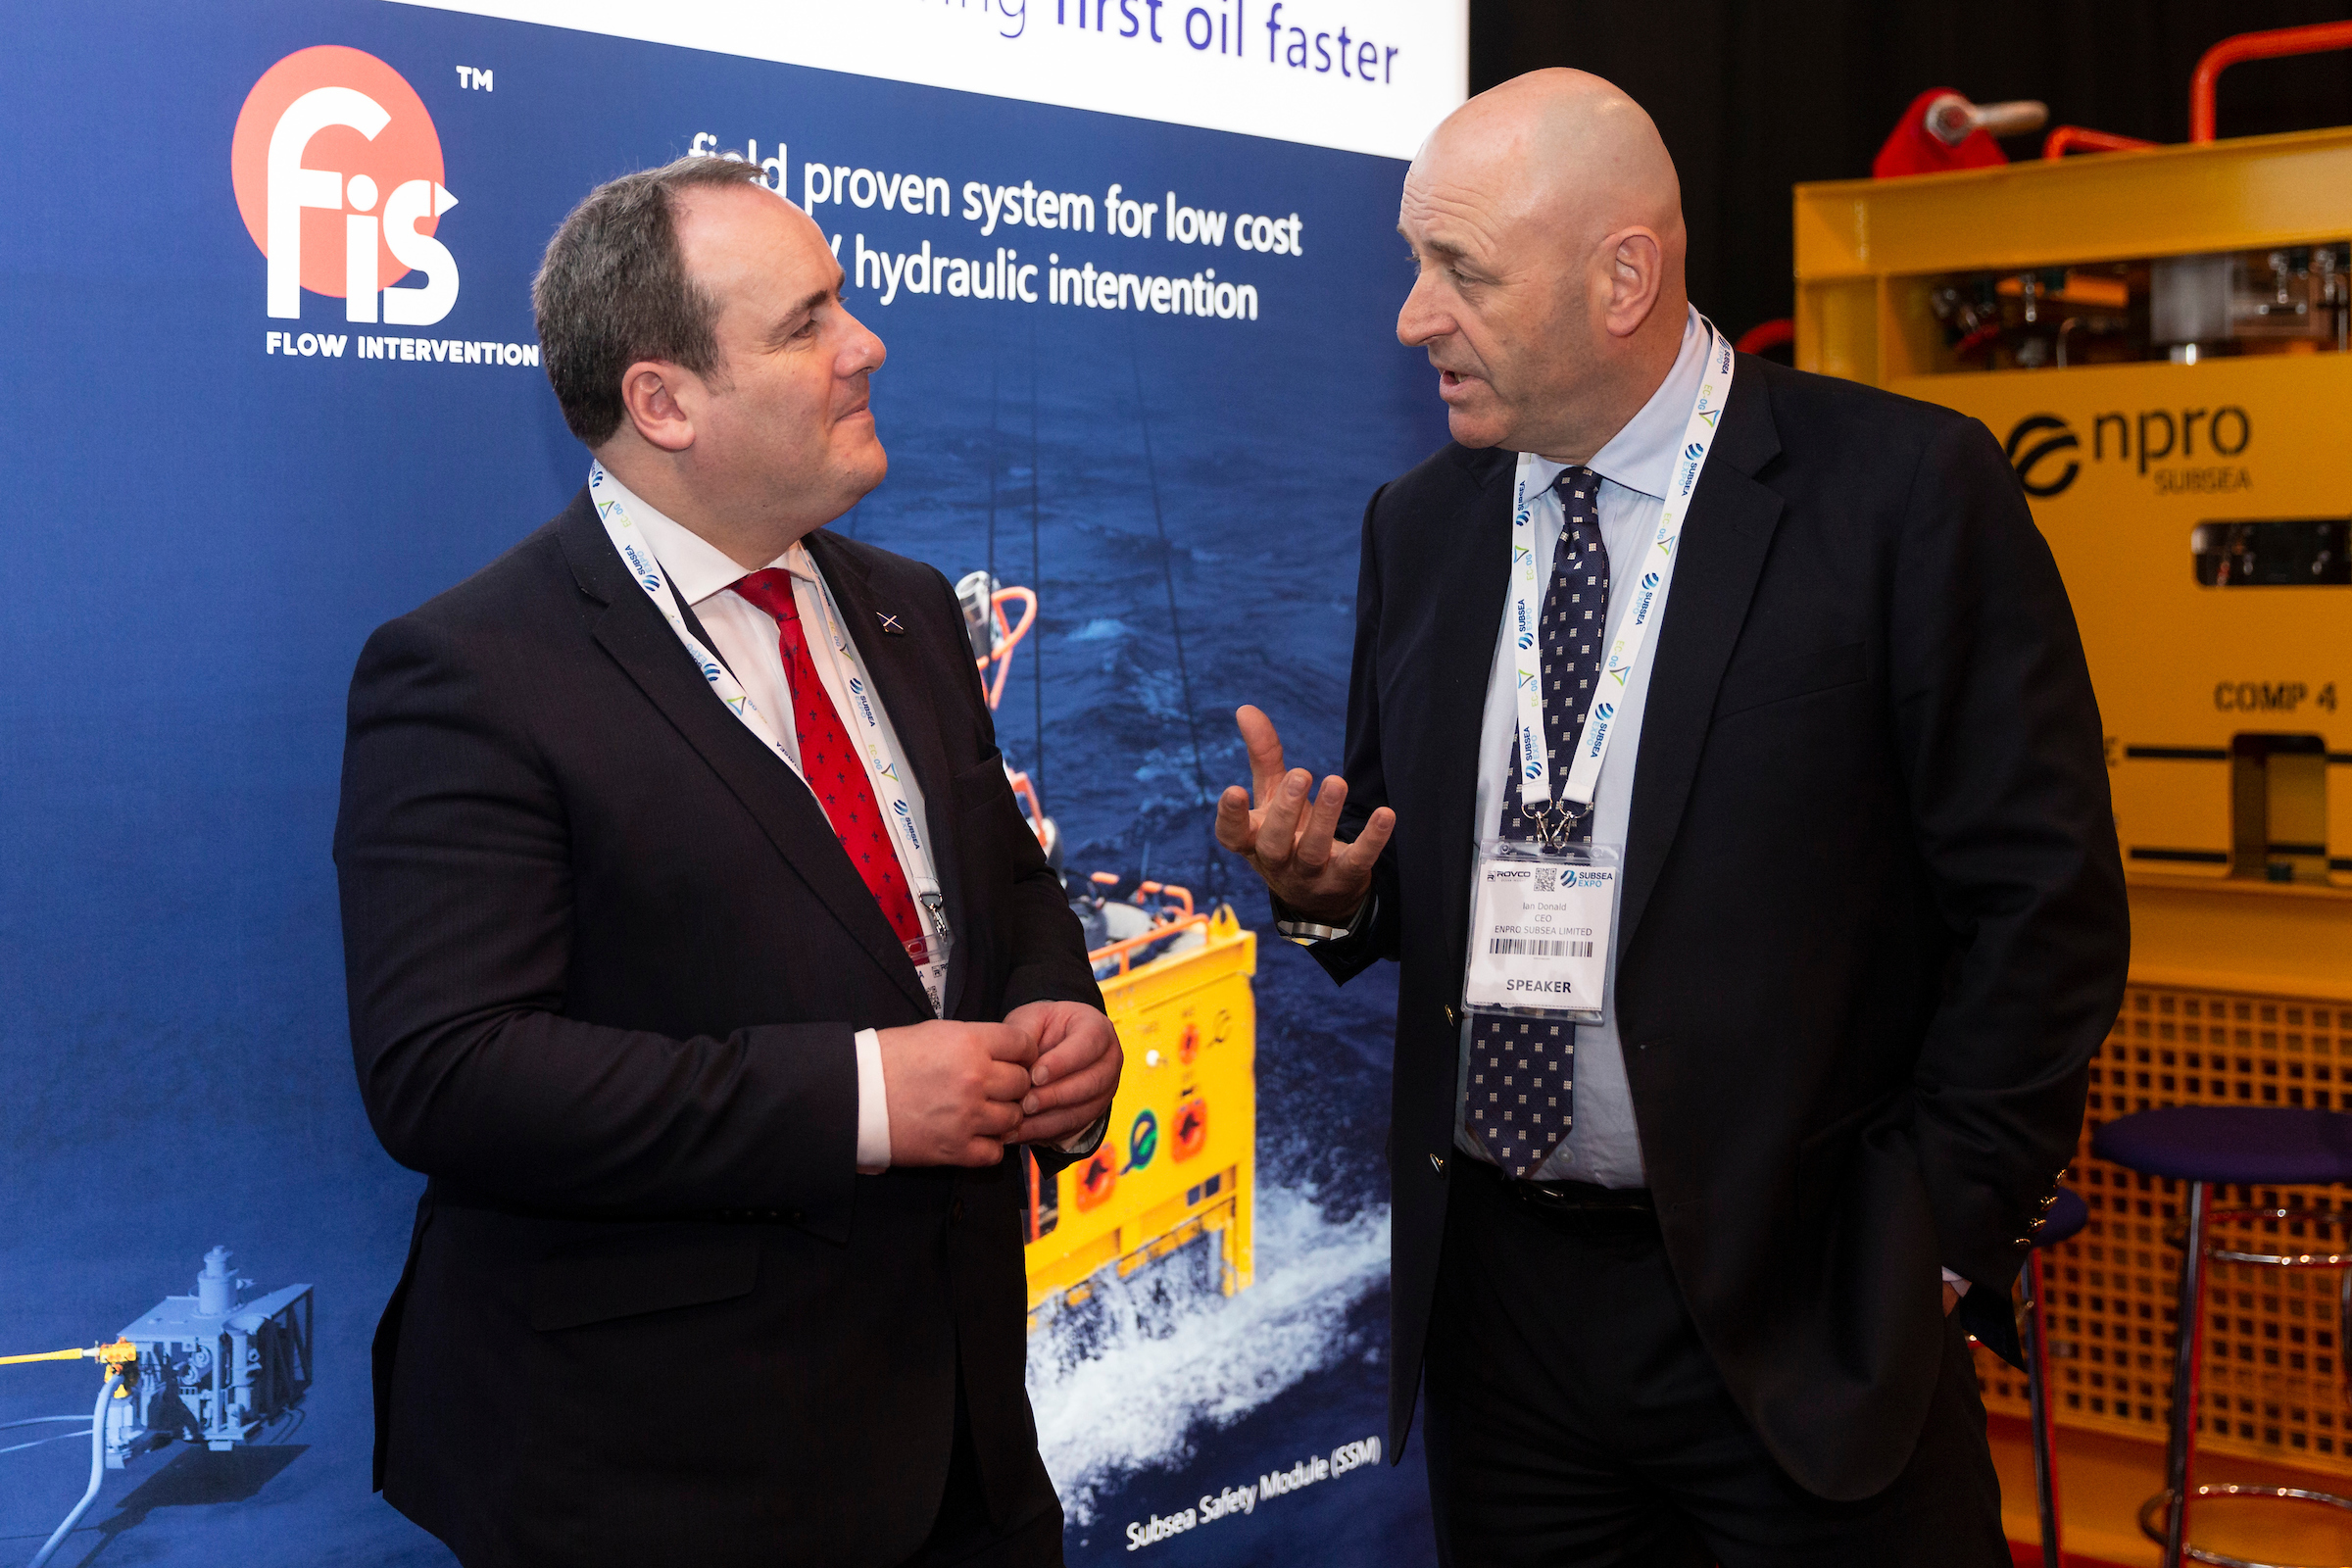 Scottish Government minister for Energy Connectivity and the Islands Paul Wheelhouse MSP with Ian Donald Enpro Subsea managing director